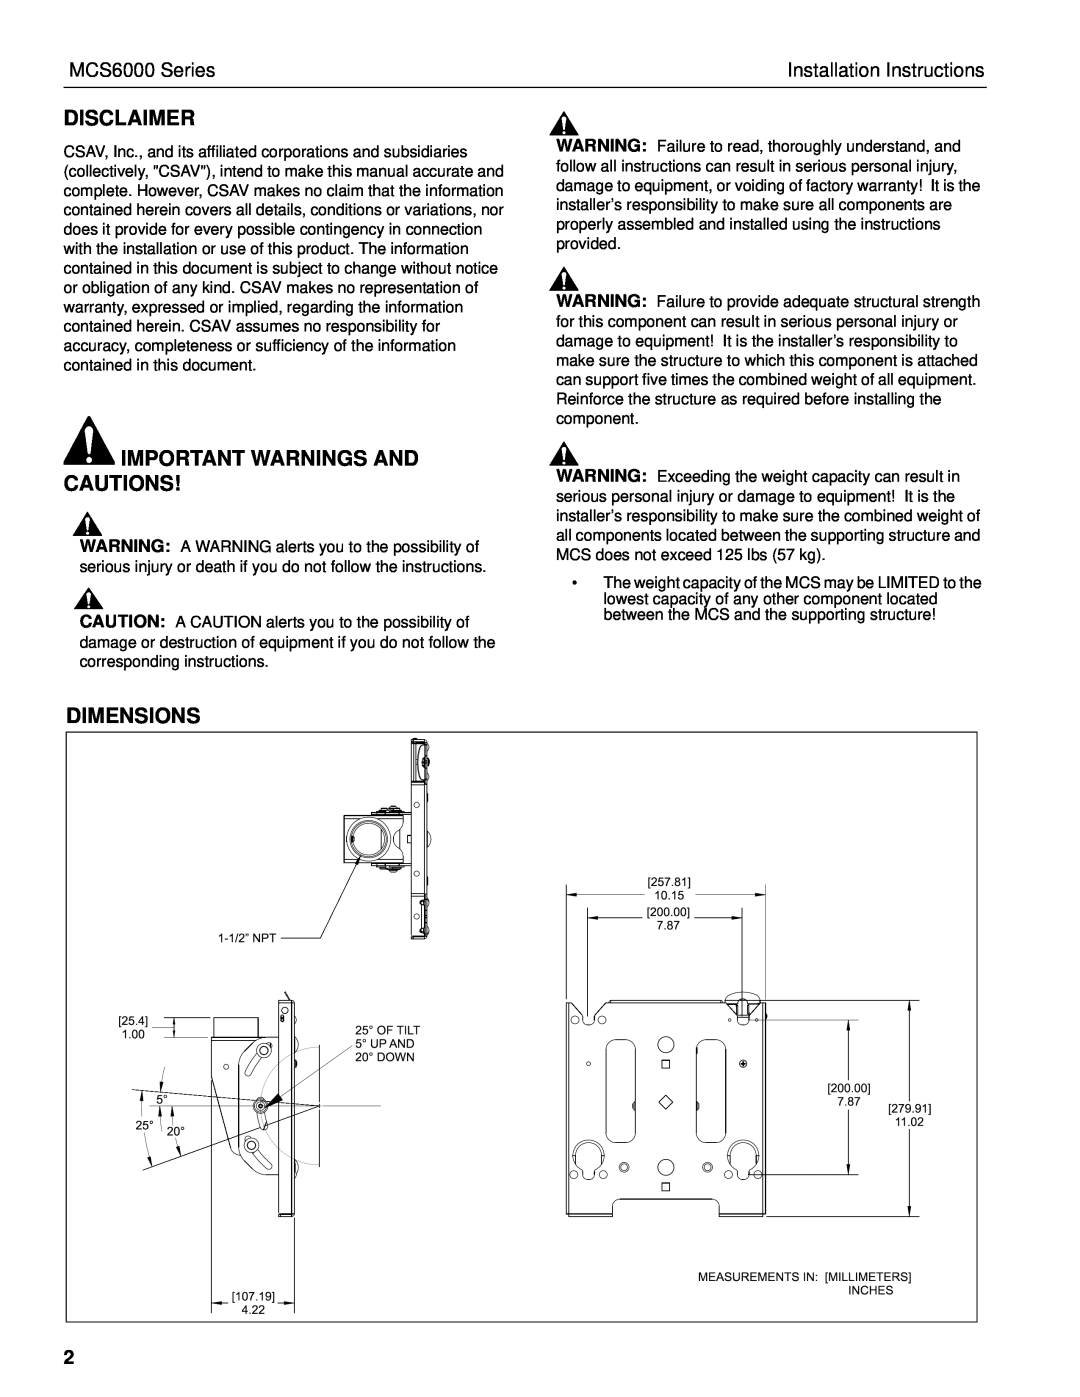 Chief Manufacturing MCS6000 Series Disclaimer, Important Warnings And Cautions, Installation Instructions, Dimensions 